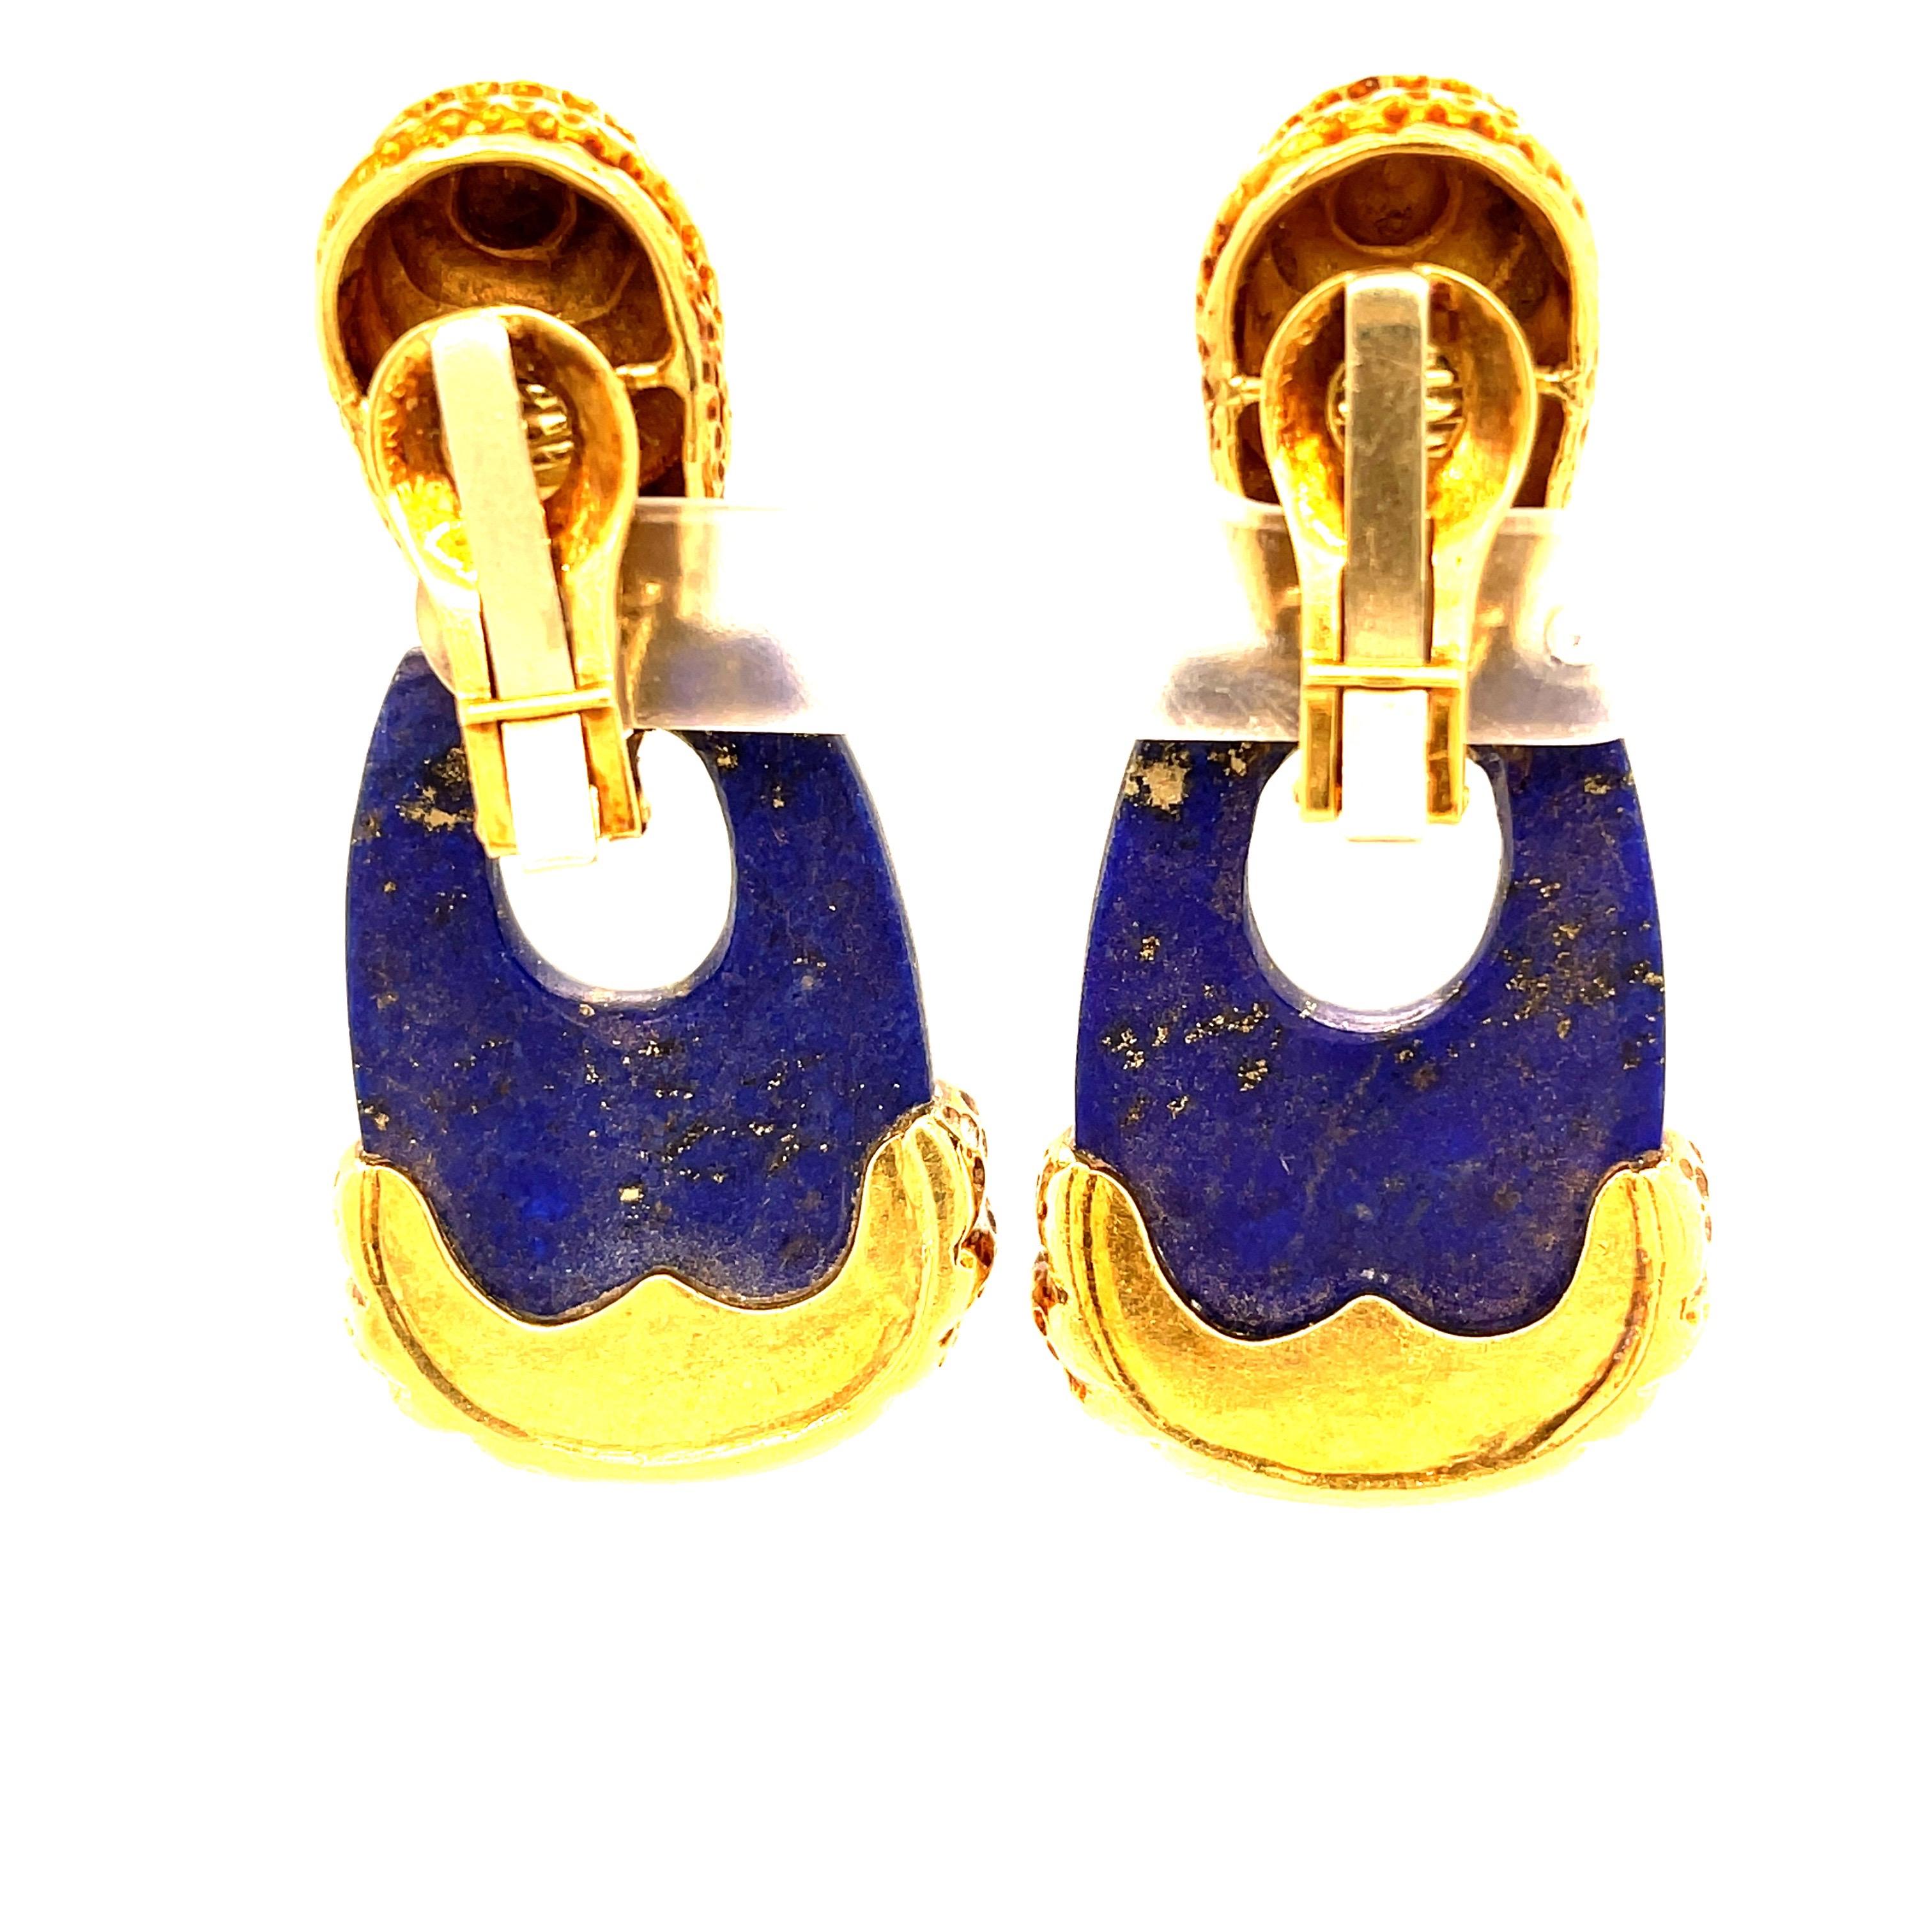 A fun pair of vintage 18k gold lapis doorknocker earrings by Wander. Wander was a French jeweler in the mid 20th Century who is known for his bold designs and now very 1970s aesthetic. These earrings have textured fluted gold parts surrounding a